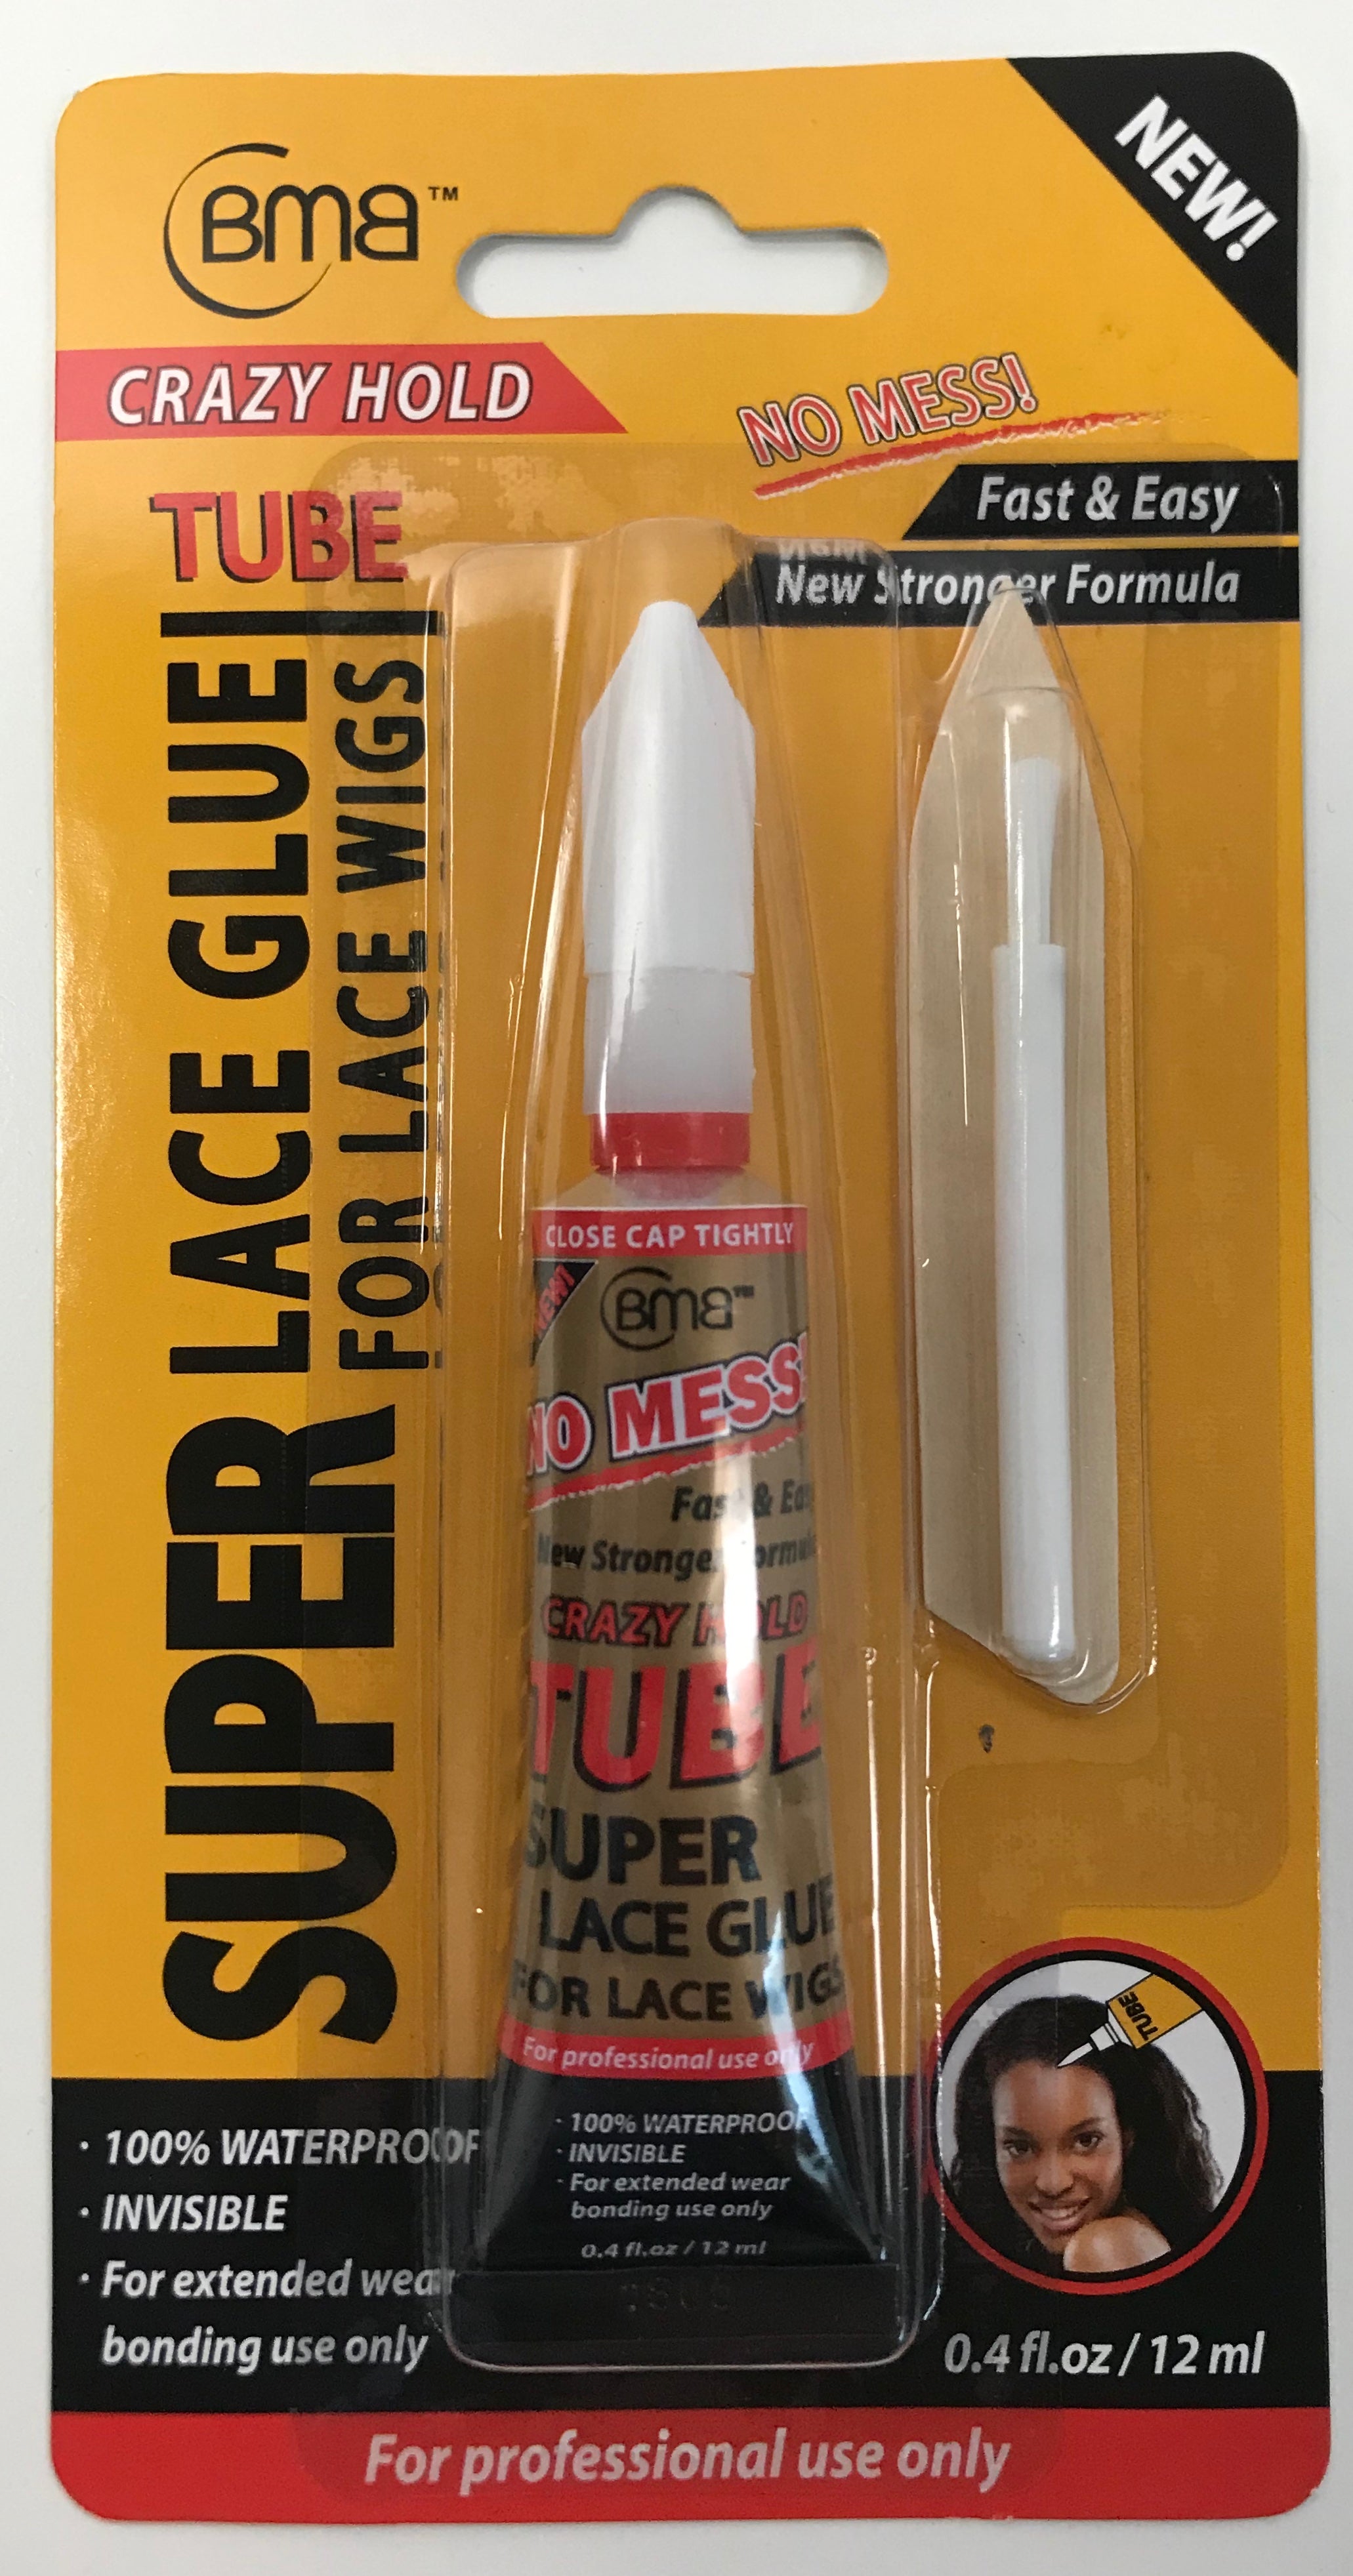 Super Lace Glue Bmb  Review and How to Remove *Must Watch* 